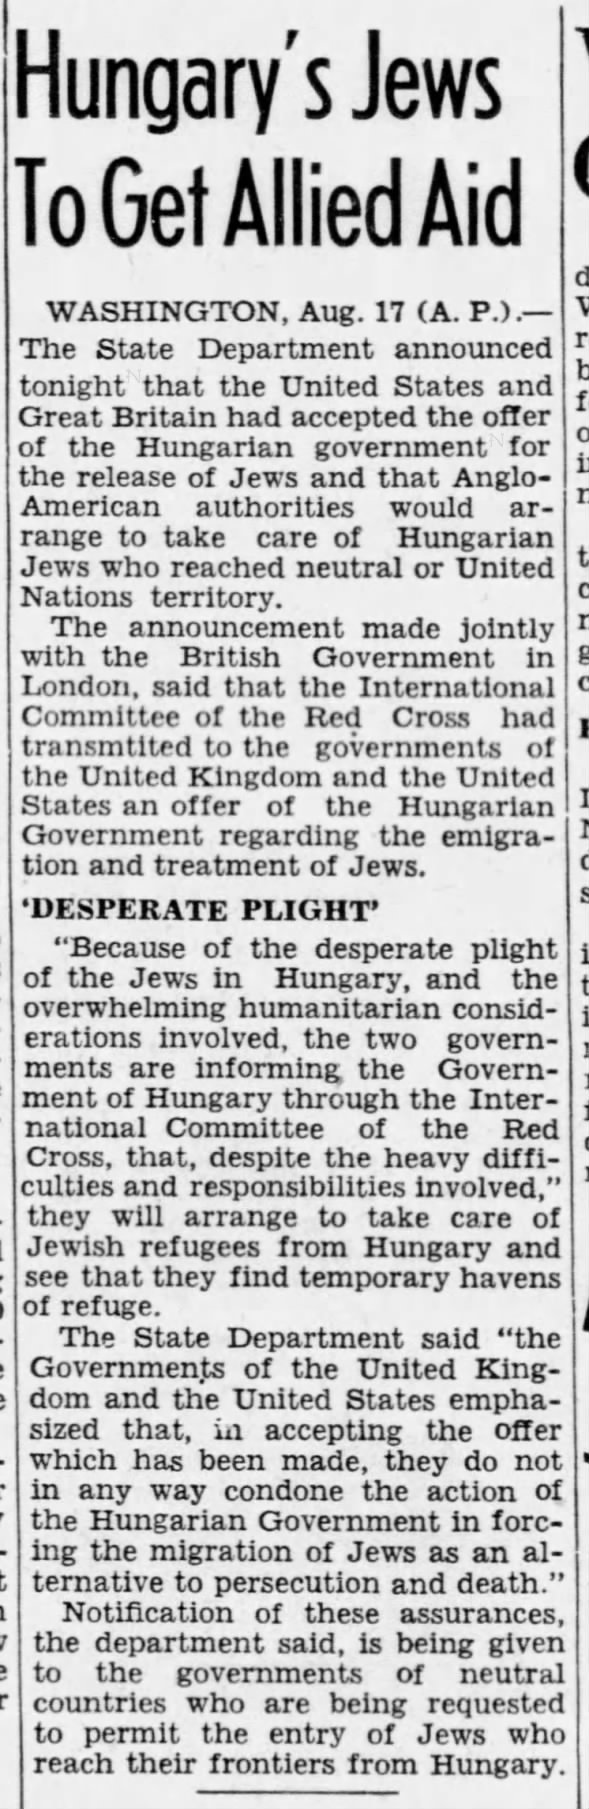 Hungary's Jews To Get Allied Aid